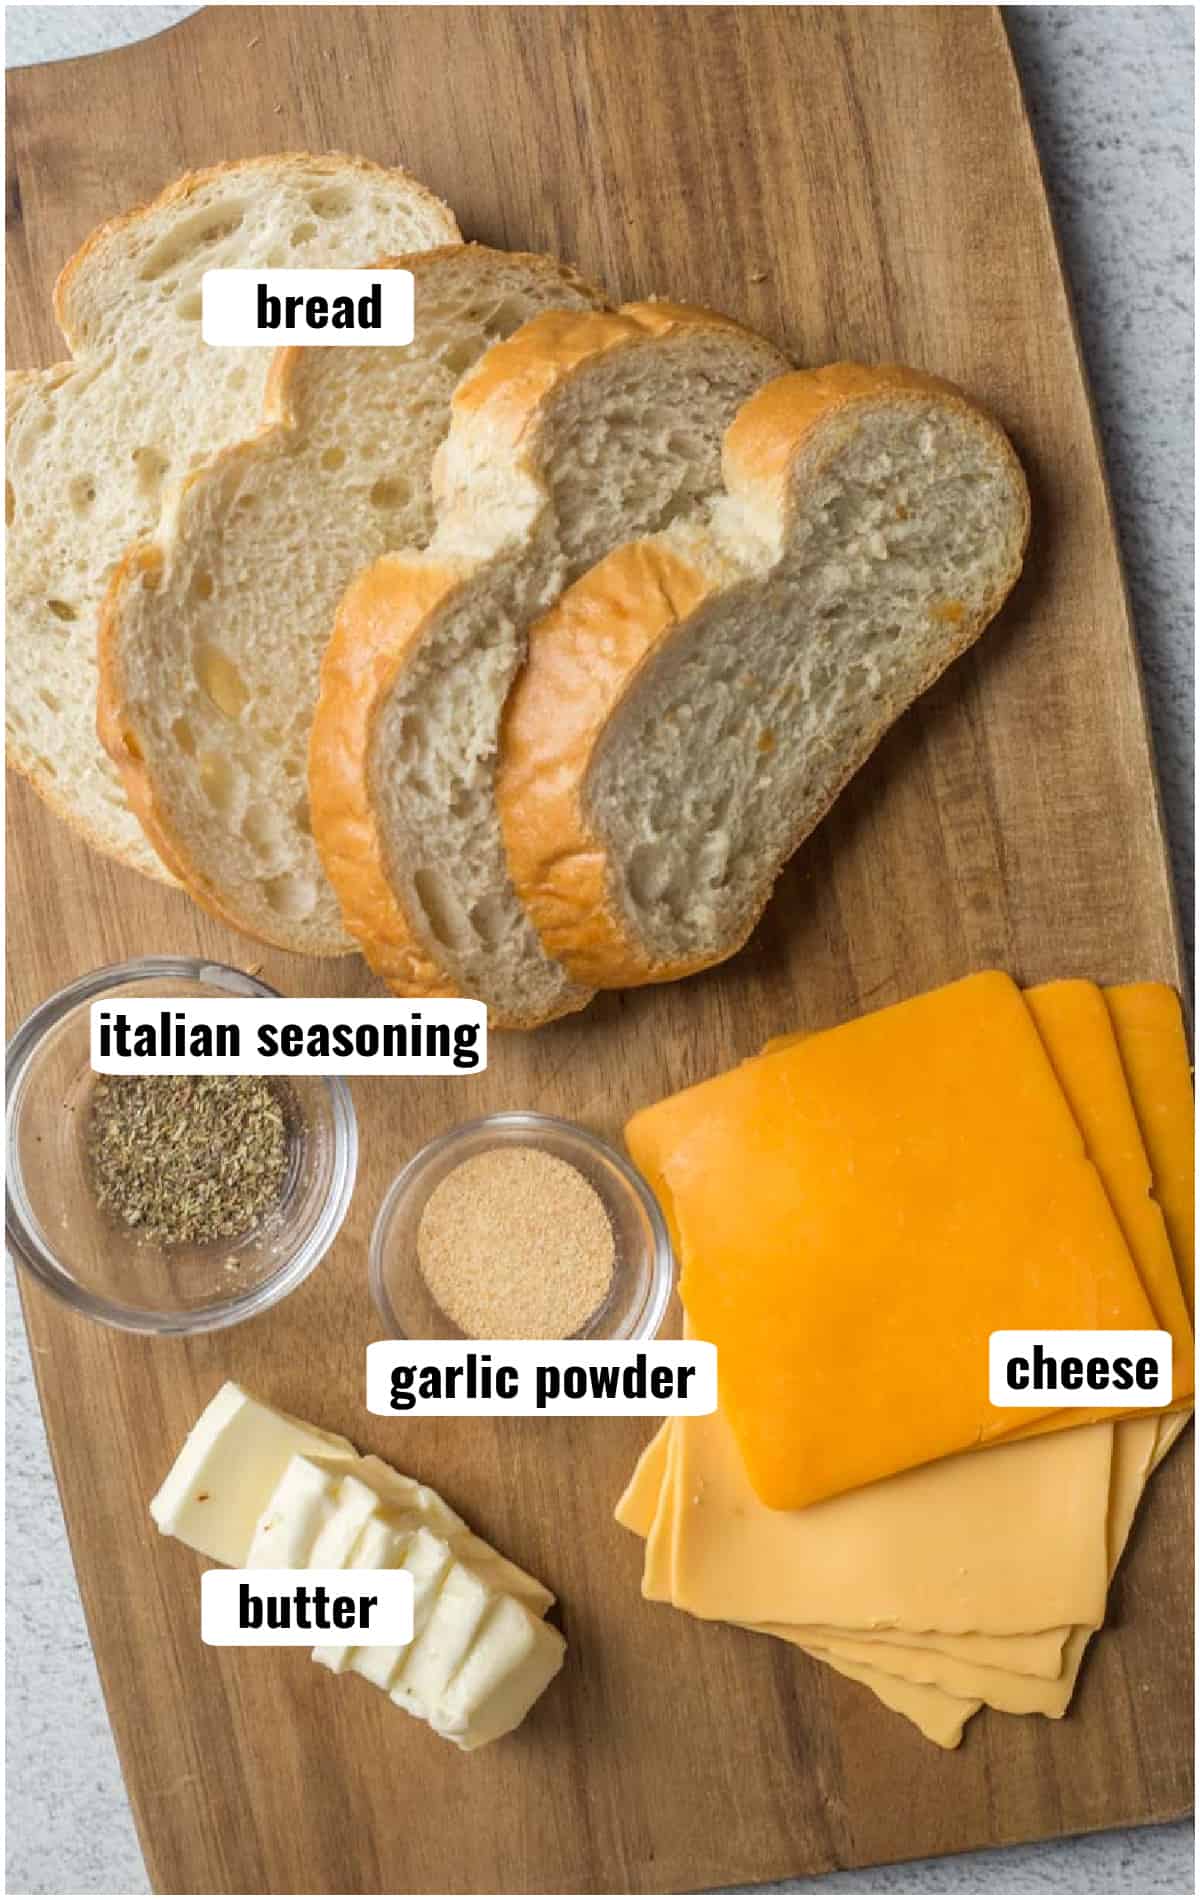 All the ingredients for making a grilled cheese, displayed on a cutting board.